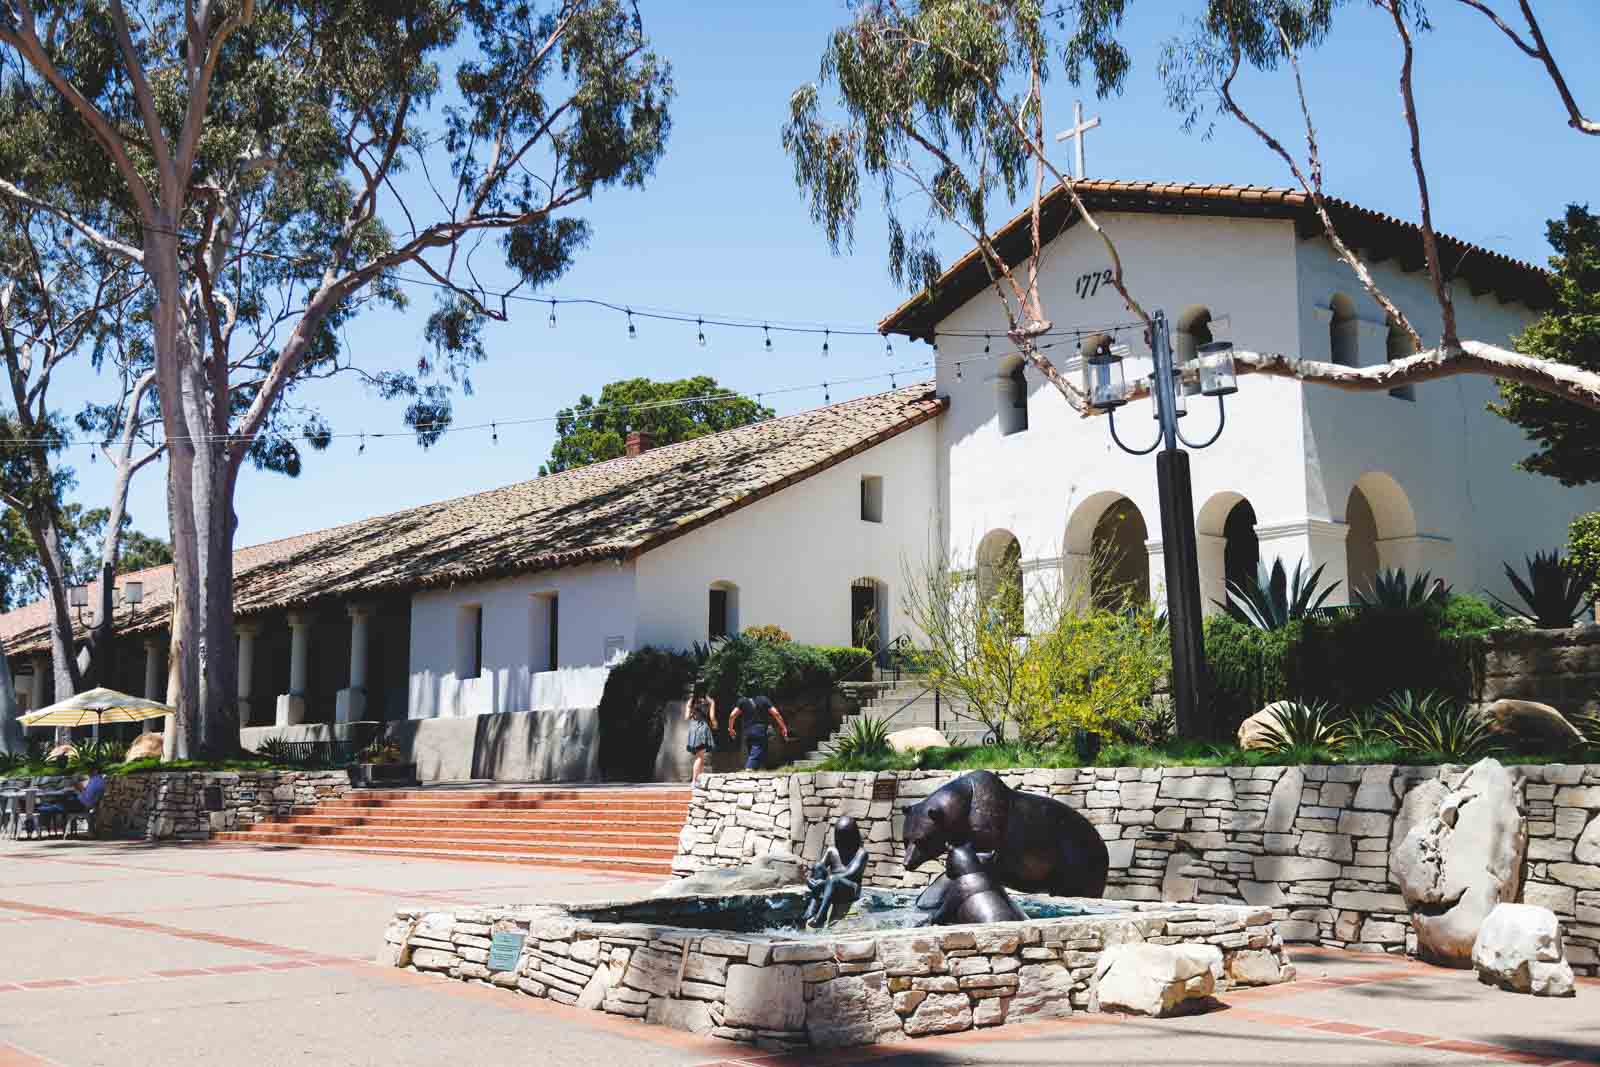 Two people entering the simple and white building of Mission San Luis Obispo de Tolosa framed by trees, walls and statues.